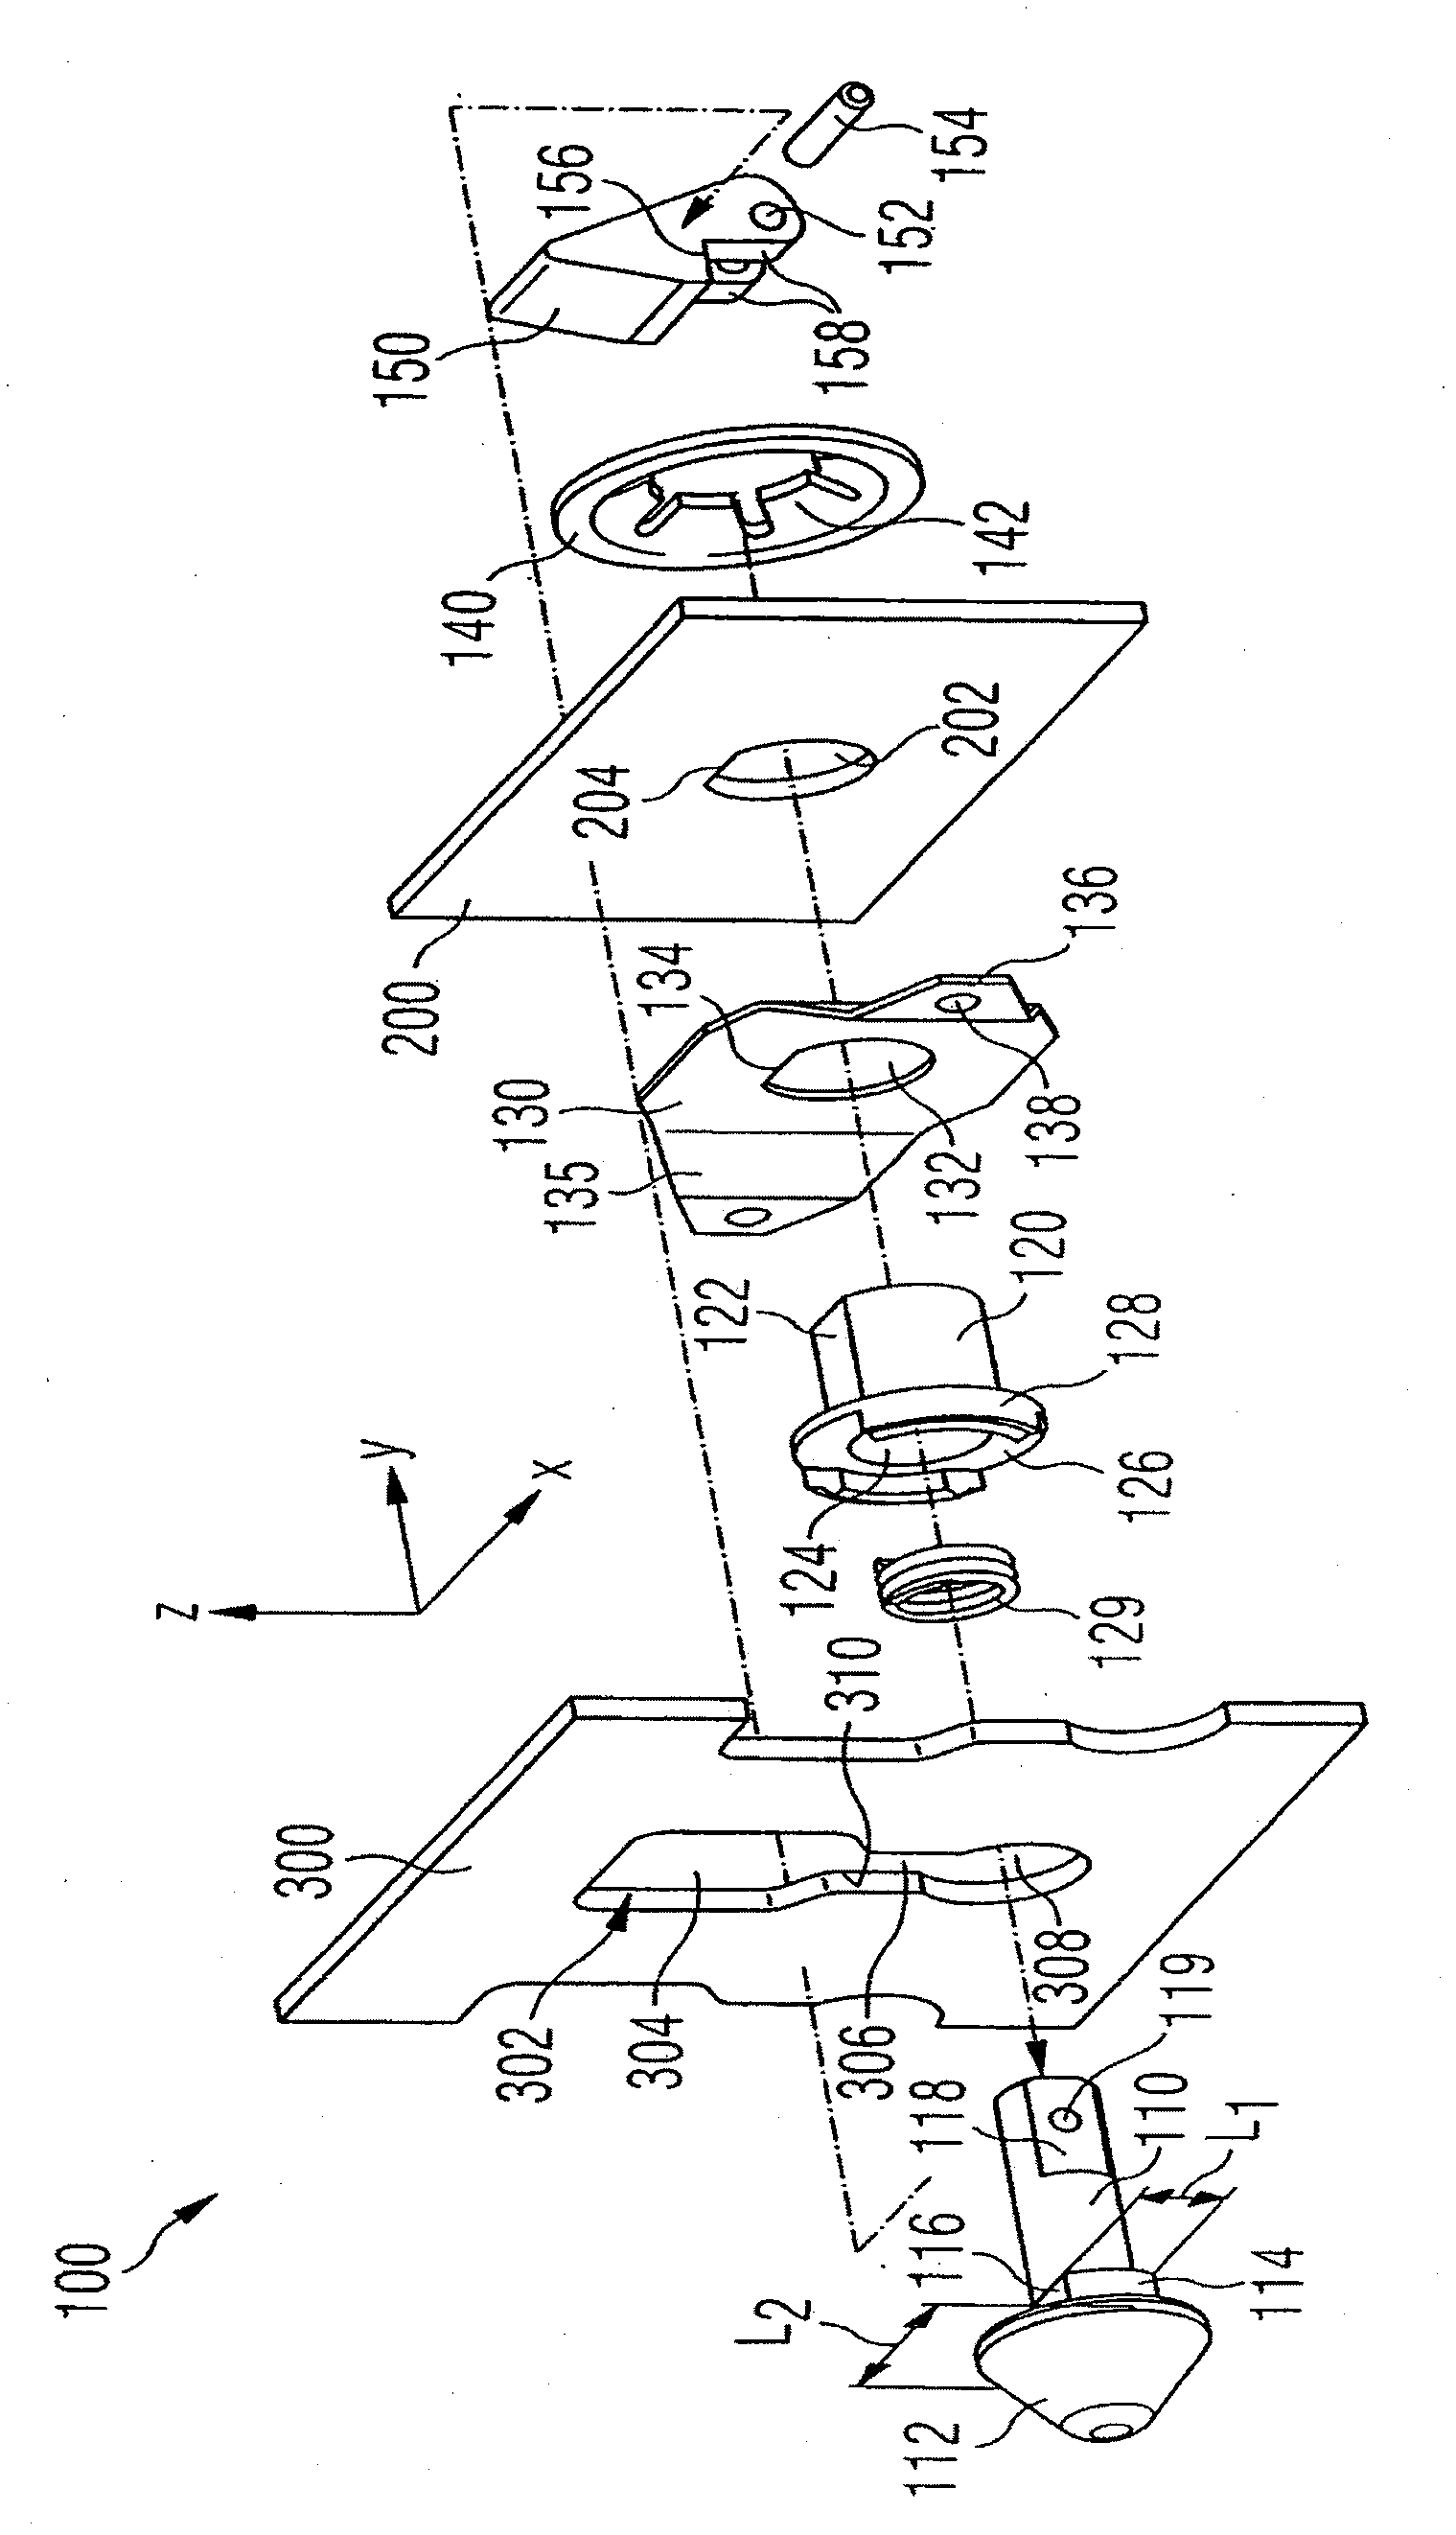 Fastening device for a module element in an airplane